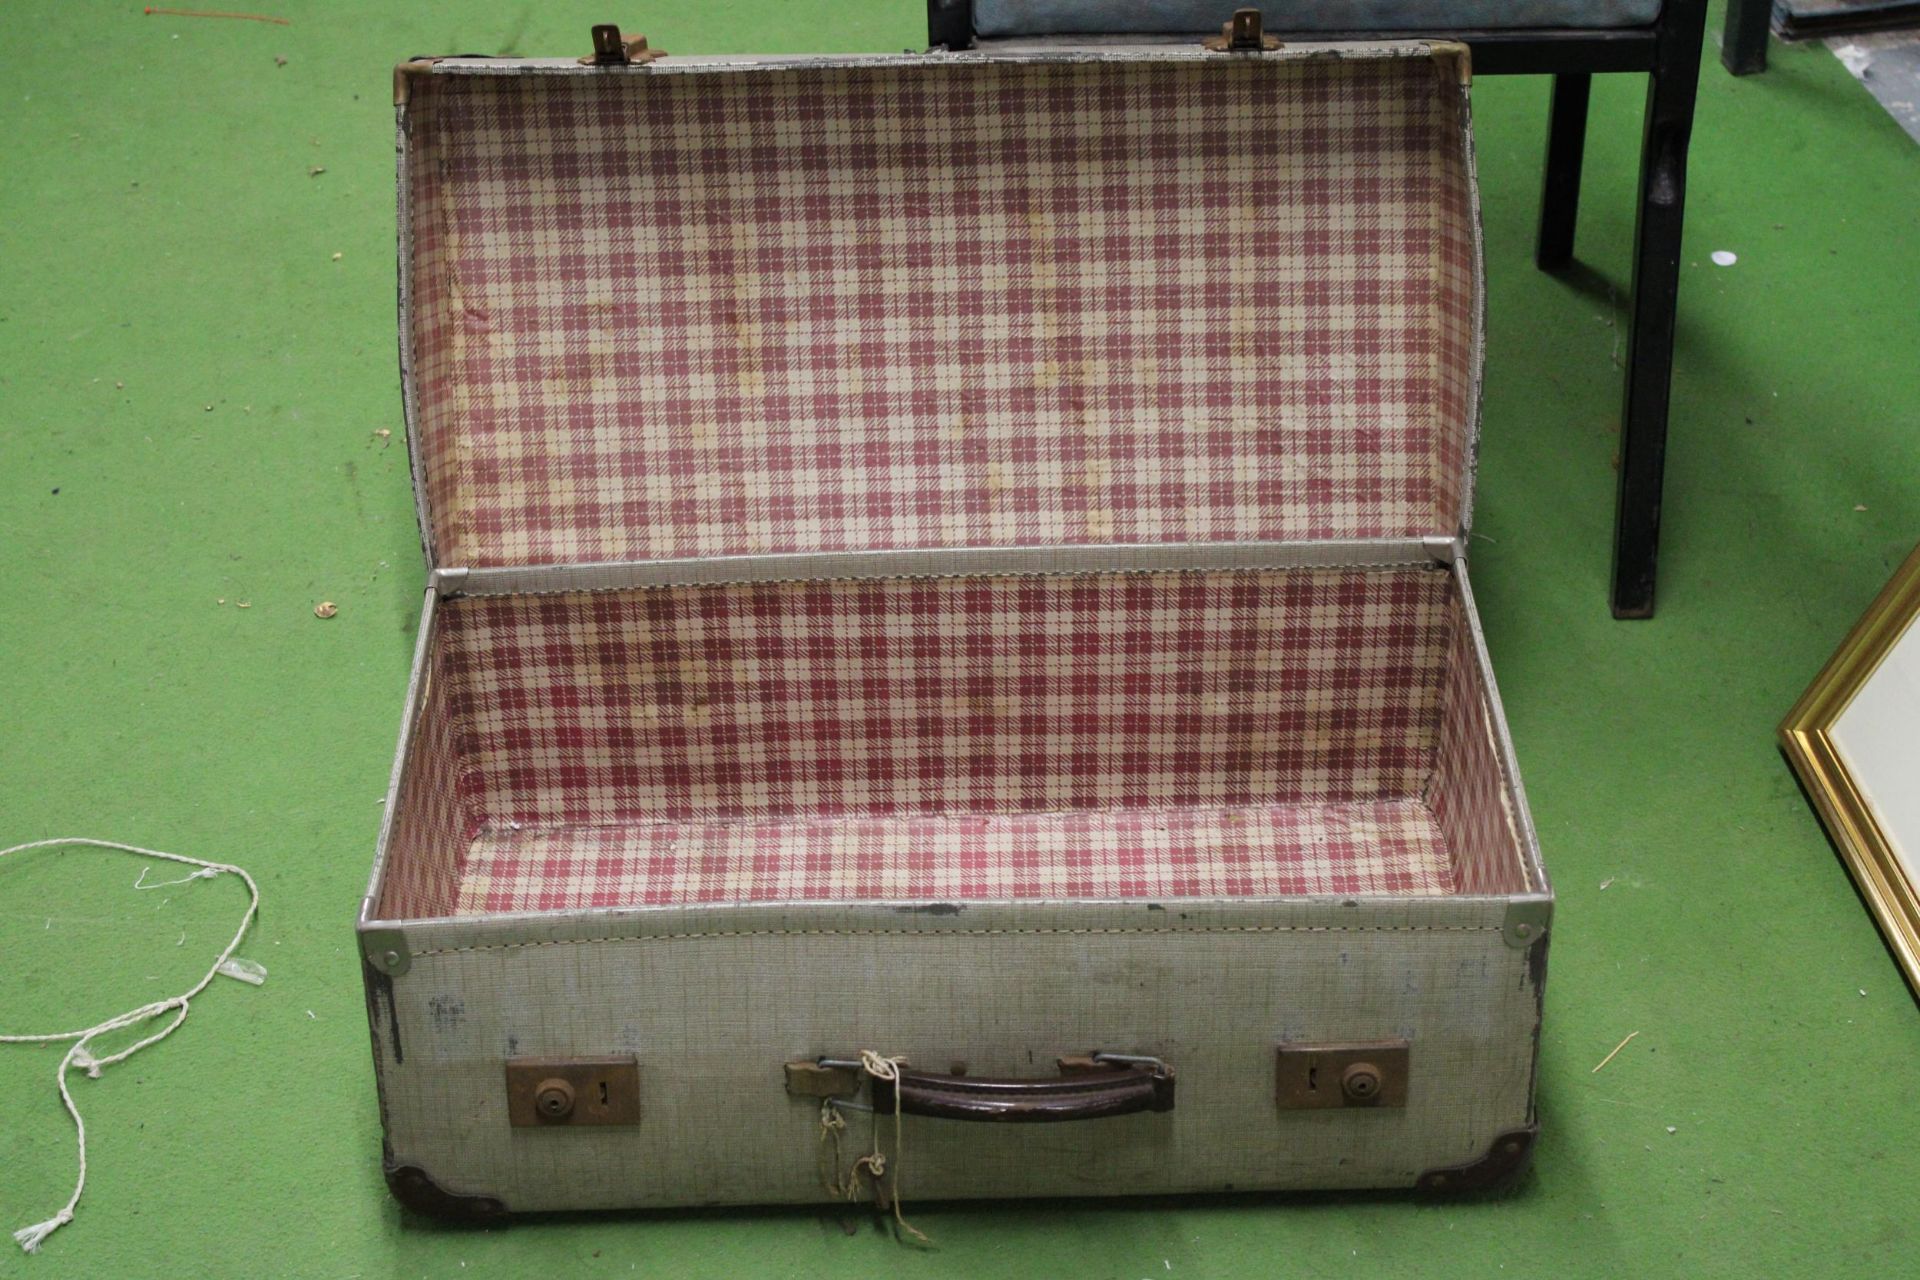 A VINTAGE SUITCASE - Image 2 of 3